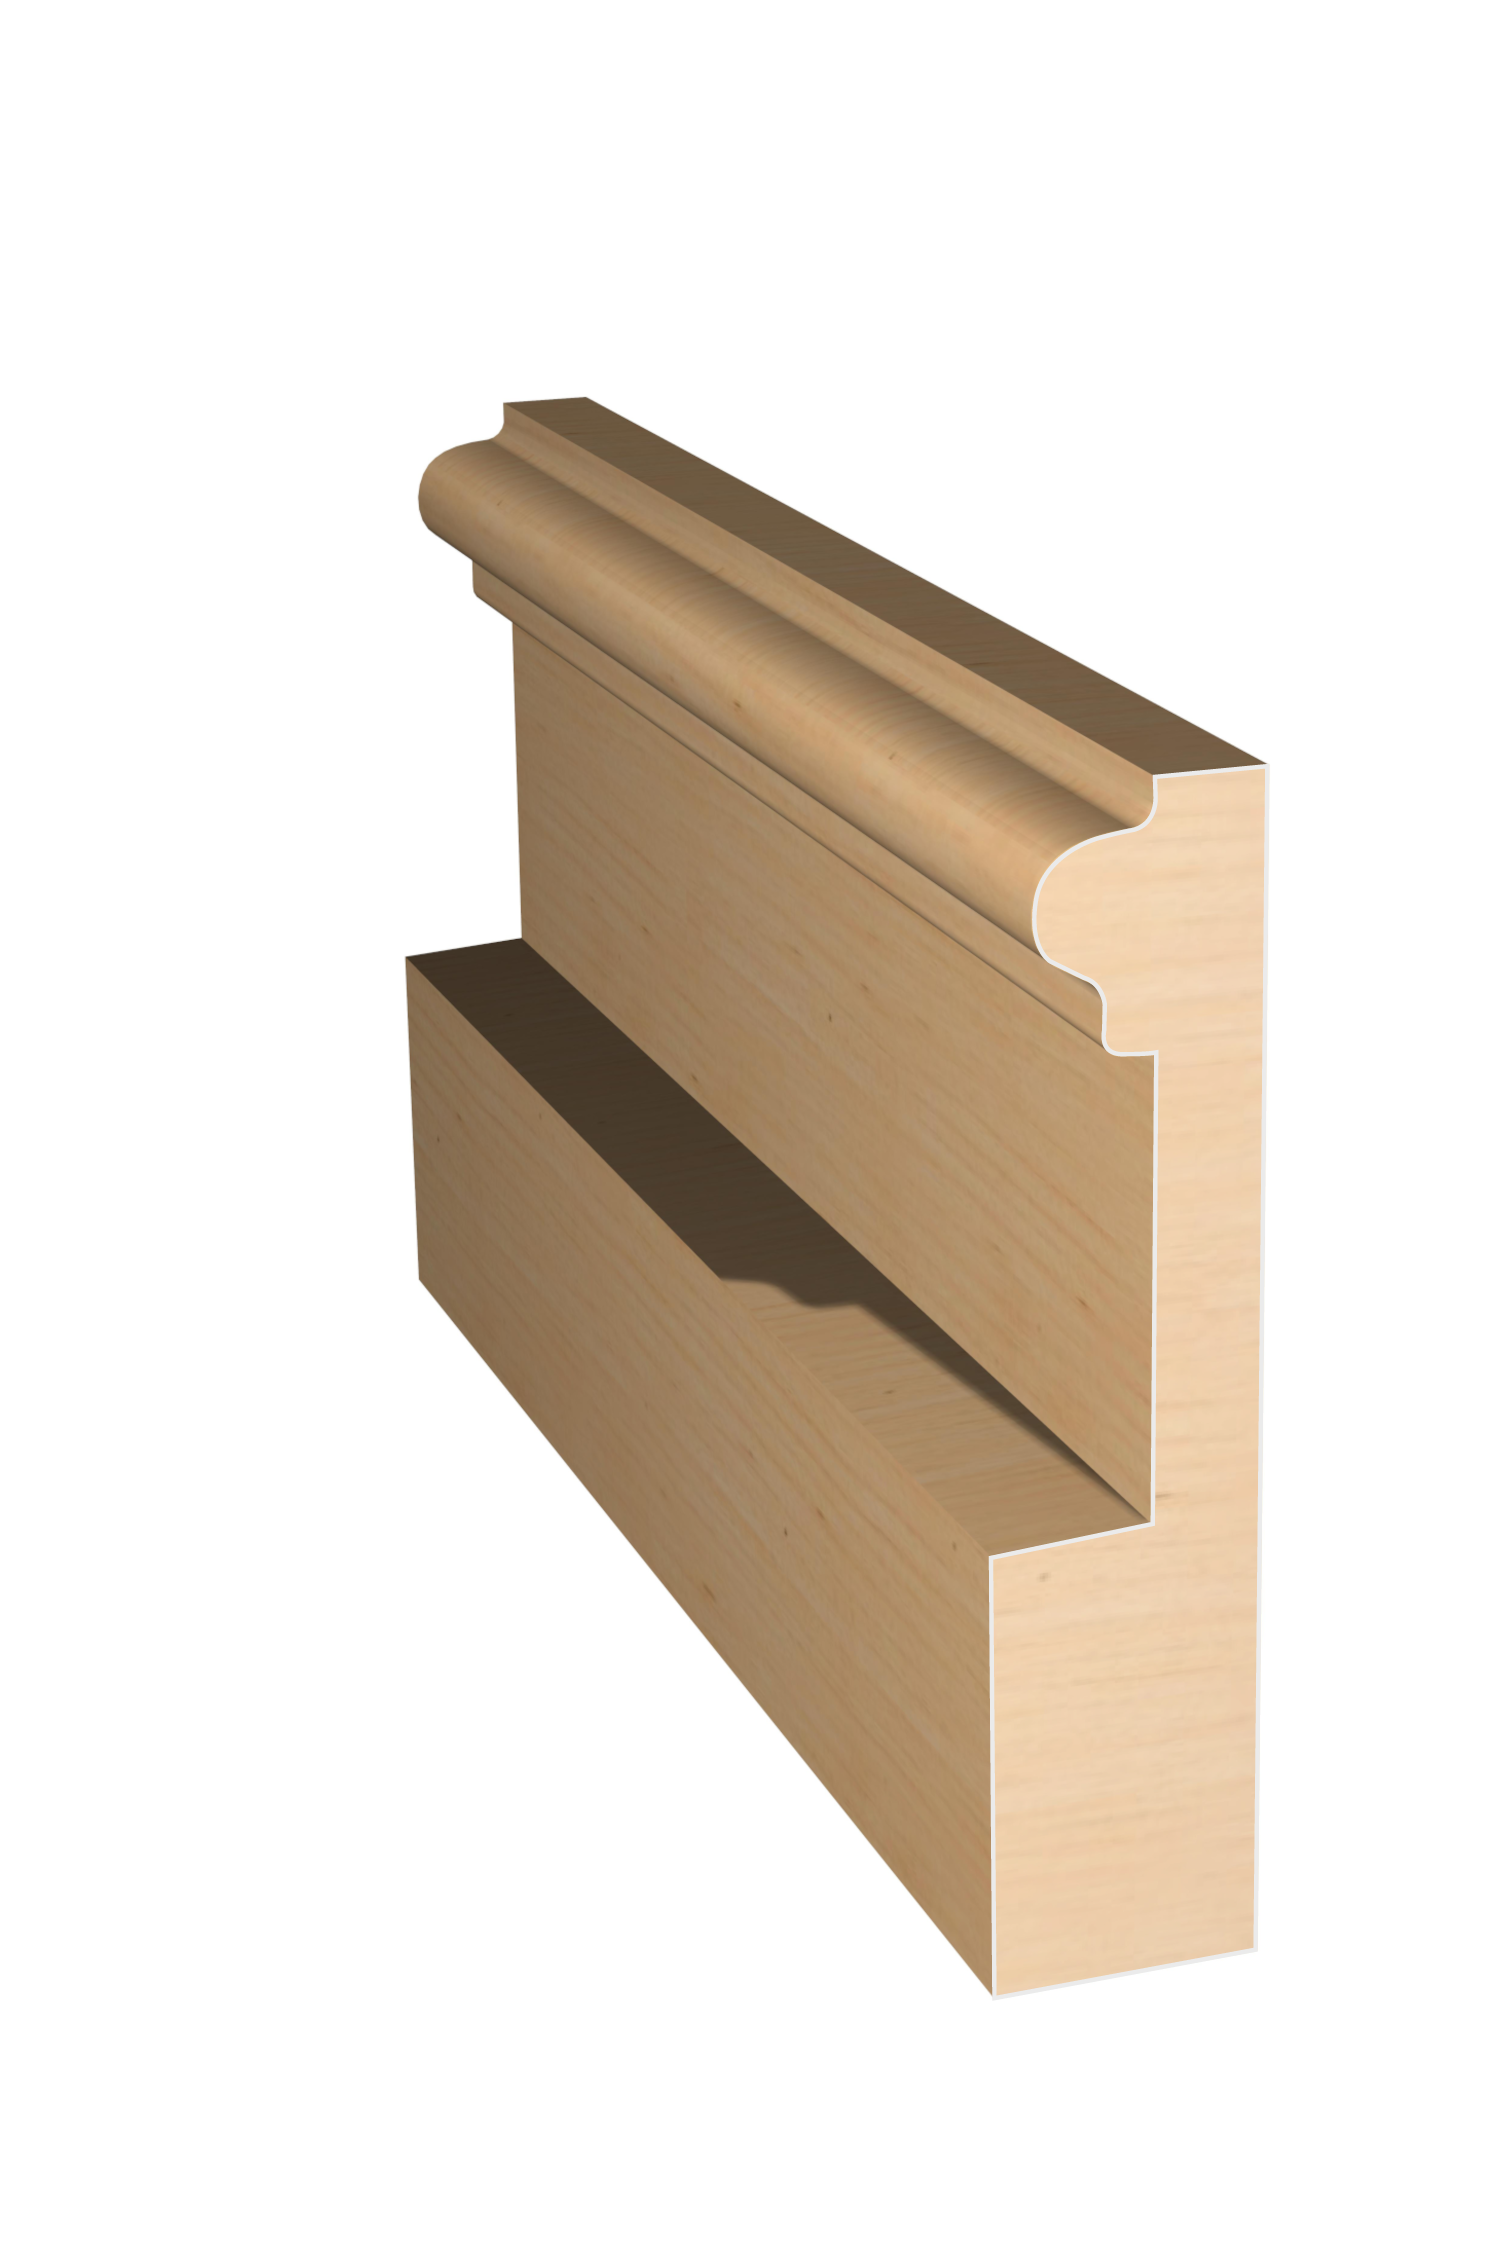 Three dimensional rendering of custom casing wood molding CAPL31434 made by Public Lumber Company in Detroit.